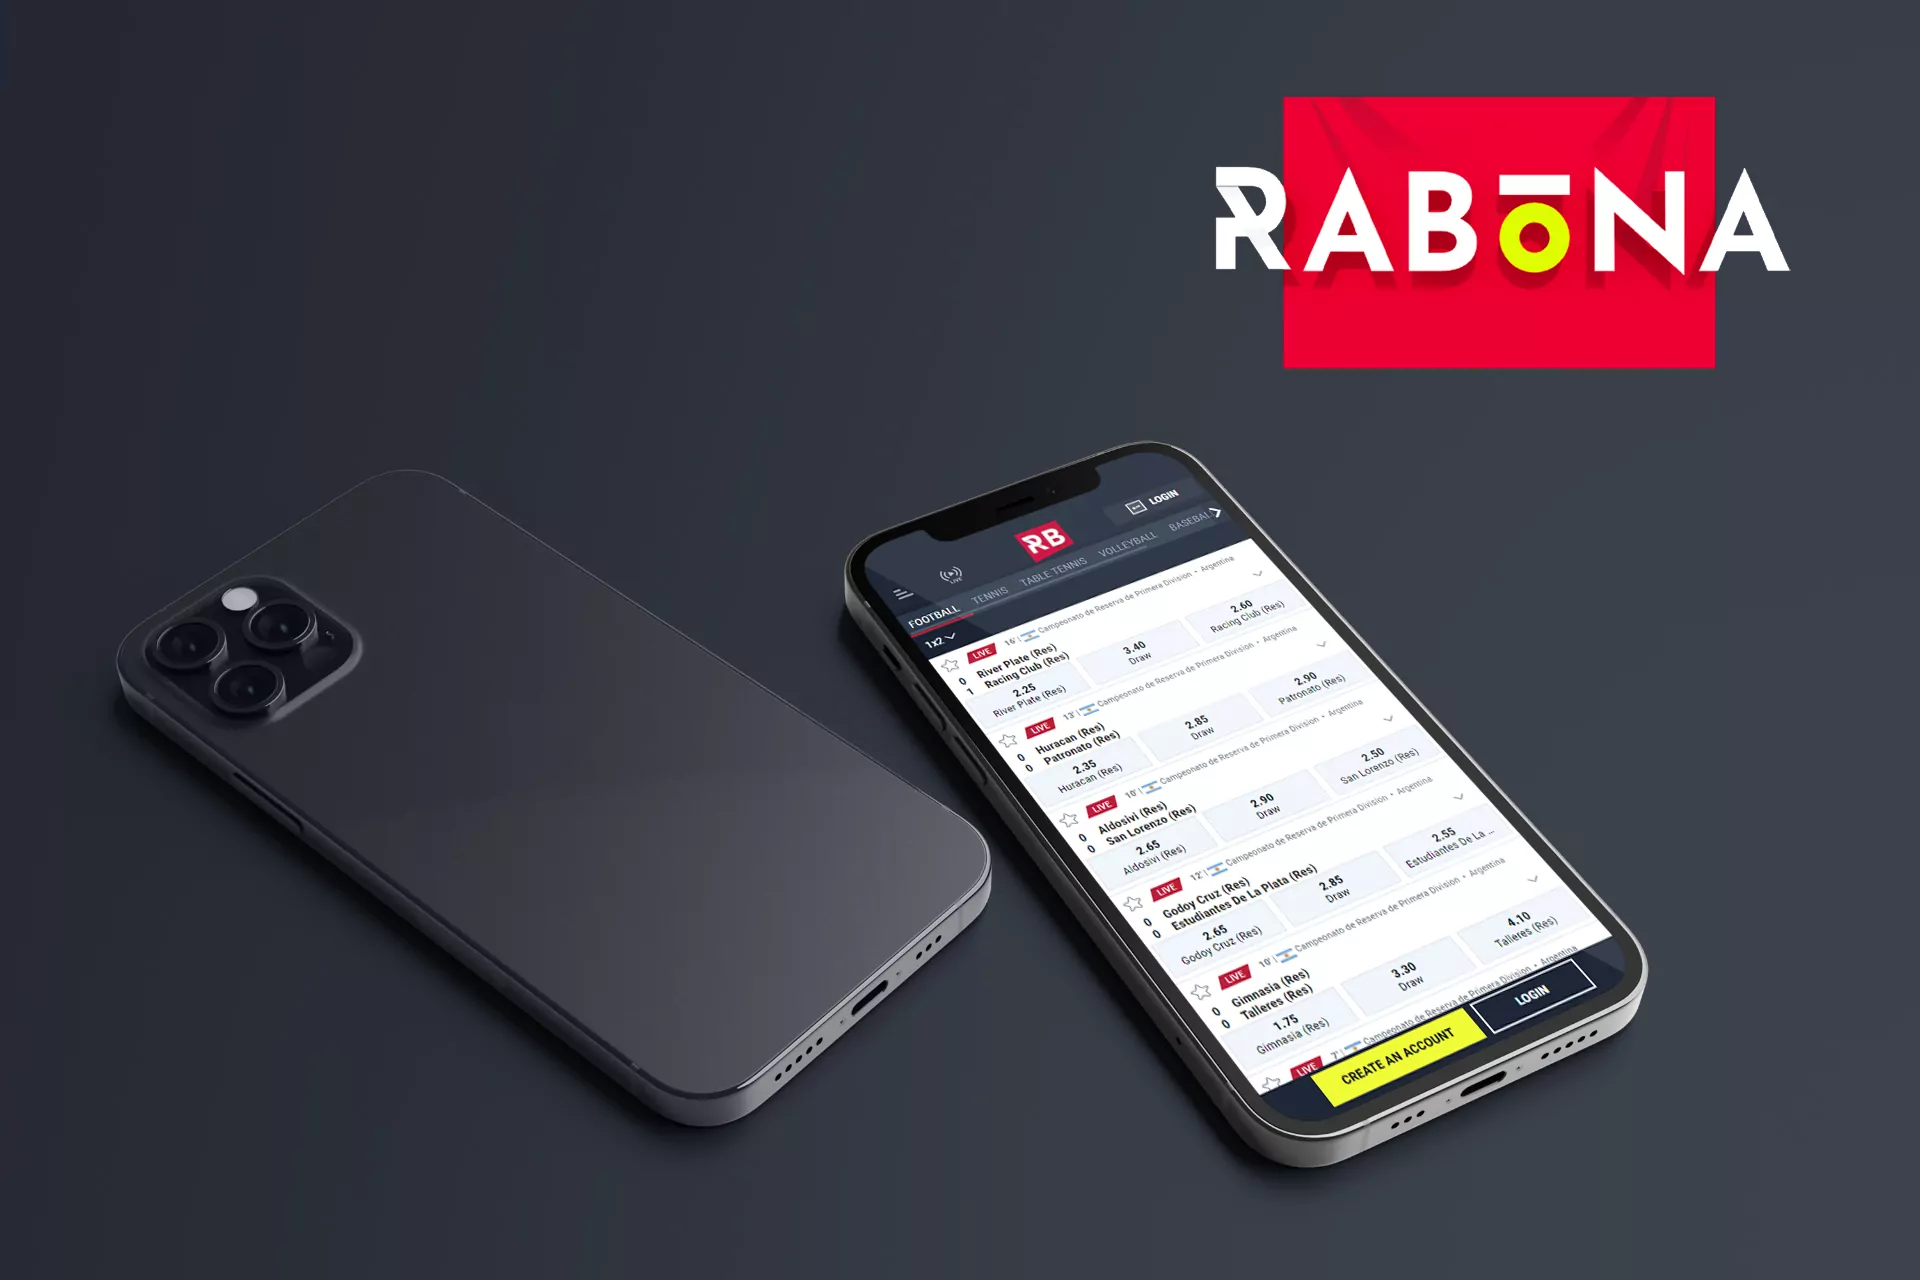 In the Rabona app, you can place bets on sports matches and play casino games.